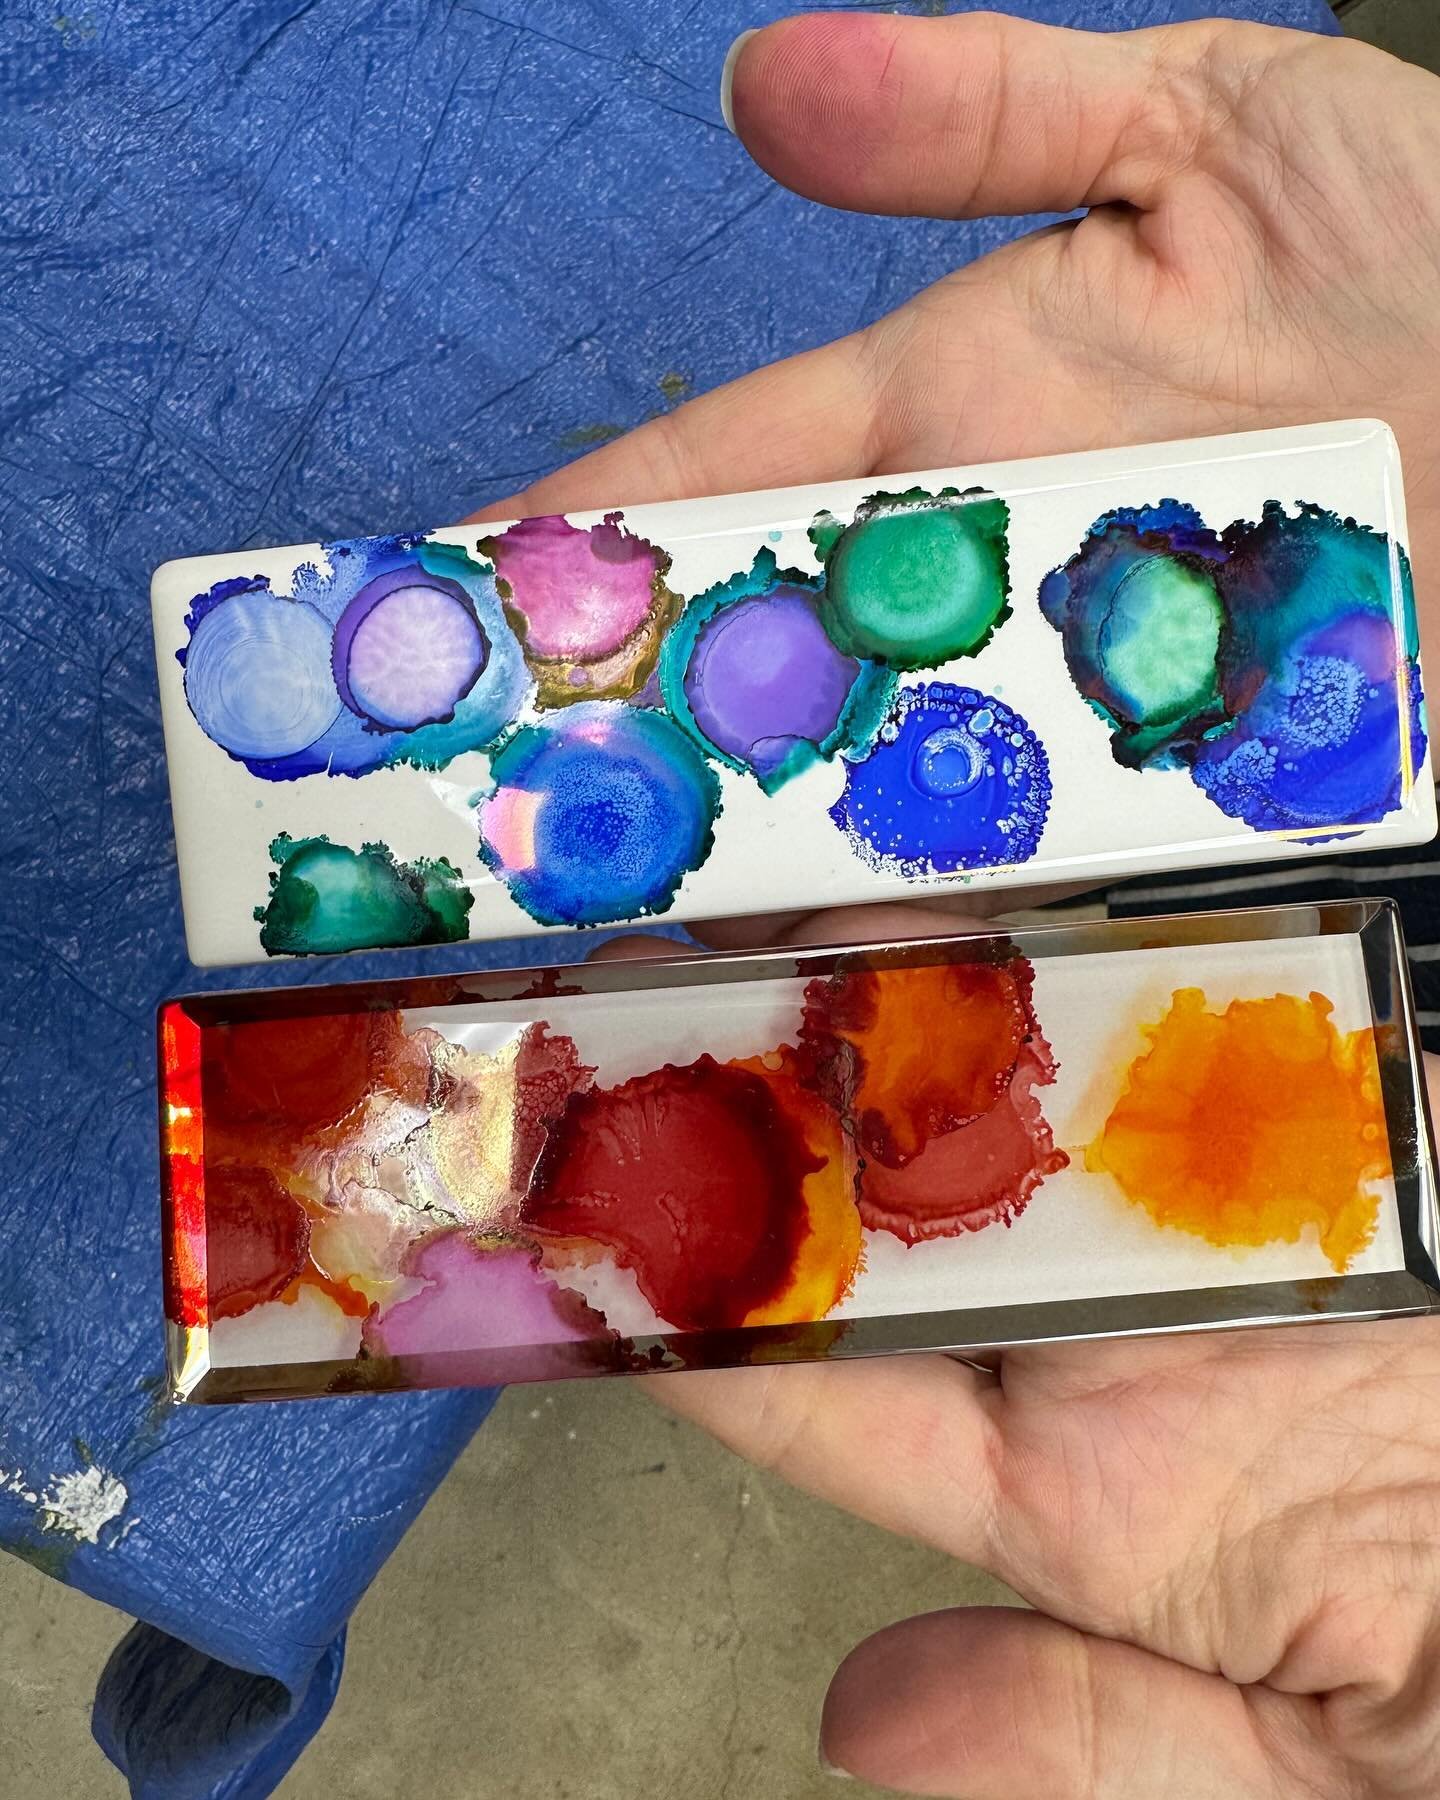 Loving the results of our alcohol ink drop paintings from Therapeutic Thursday last week! 

We have Monday Open Studio tonight from 5:30 - 7:30 pm. Members, come stop by! 🤗

#AlcoholInkArt #OpenStudio #MemberArt